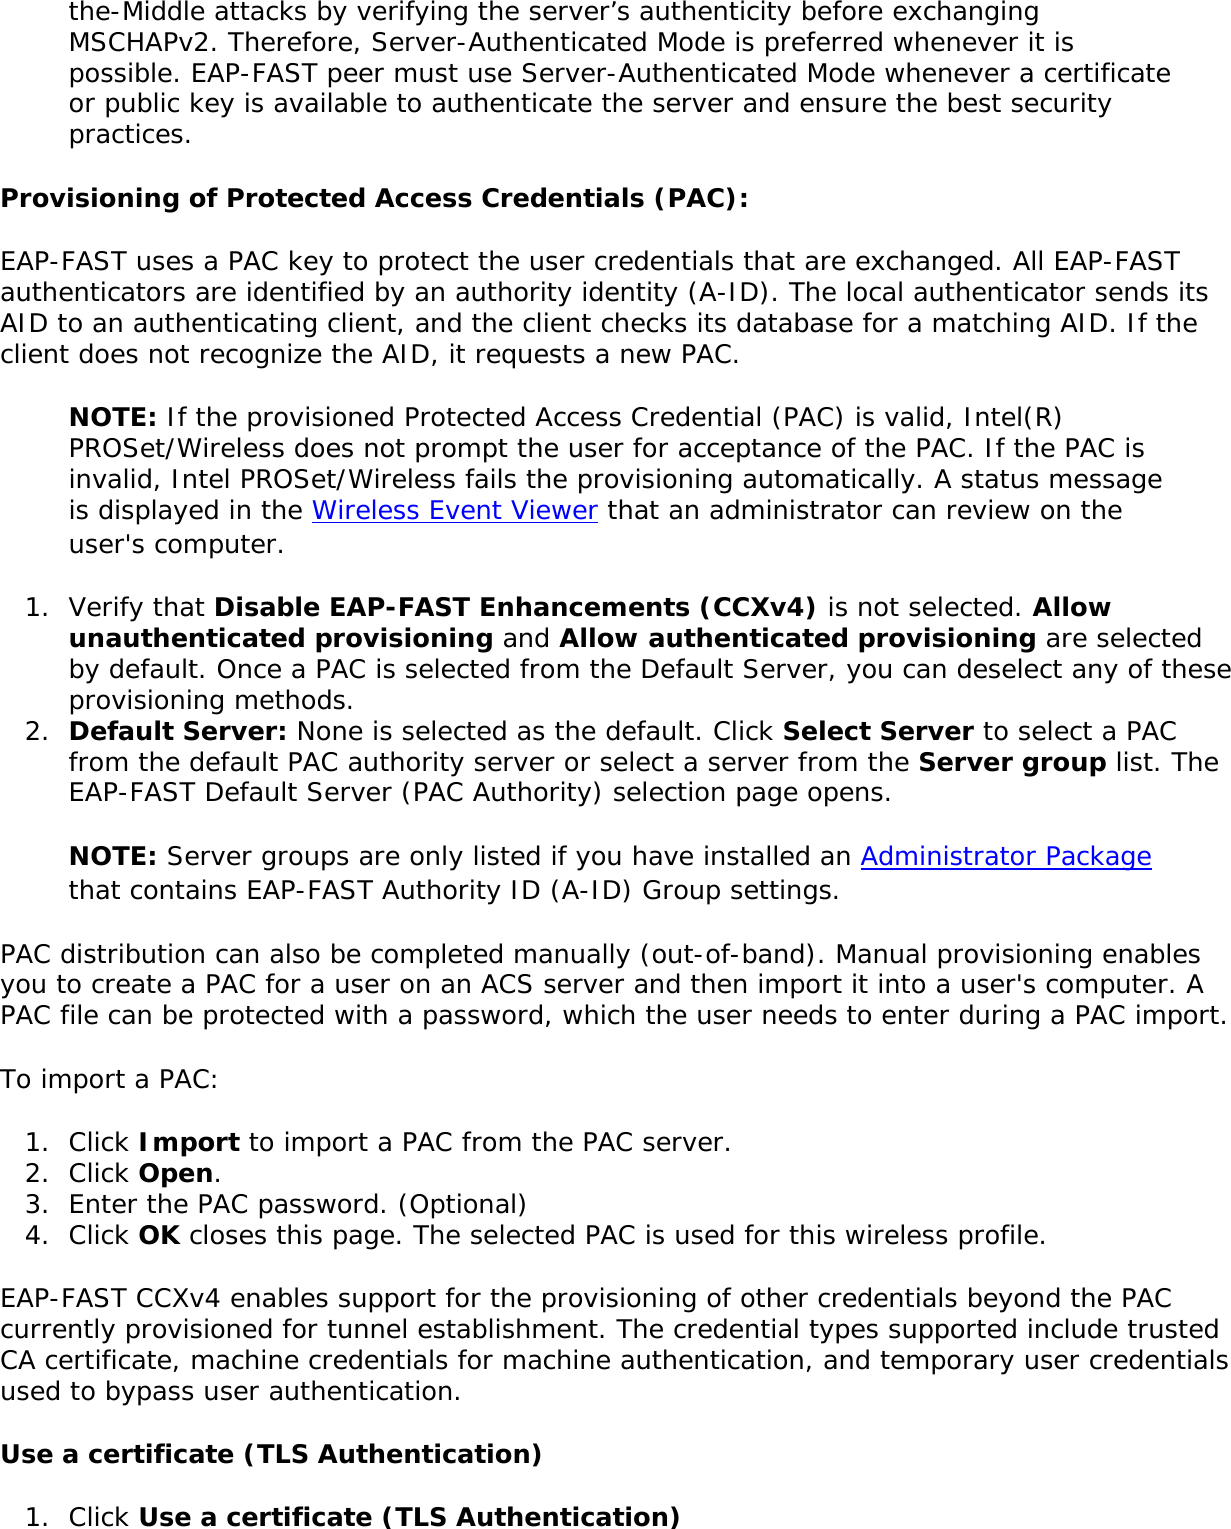 the-Middle attacks by verifying the server’s authenticity before exchanging MSCHAPv2. Therefore, Server-Authenticated Mode is preferred whenever it is possible. EAP-FAST peer must use Server-Authenticated Mode whenever a certificate or public key is available to authenticate the server and ensure the best security practices.Provisioning of Protected Access Credentials (PAC): EAP-FAST uses a PAC key to protect the user credentials that are exchanged. All EAP-FAST authenticators are identified by an authority identity (A-ID). The local authenticator sends its AID to an authenticating client, and the client checks its database for a matching AID. If the client does not recognize the AID, it requests a new PAC. NOTE: If the provisioned Protected Access Credential (PAC) is valid, Intel(R) PROSet/Wireless does not prompt the user for acceptance of the PAC. If the PAC is invalid, Intel PROSet/Wireless fails the provisioning automatically. A status message is displayed in the Wireless Event Viewer that an administrator can review on the user&apos;s computer. 1.  Verify that Disable EAP-FAST Enhancements (CCXv4) is not selected. Allow unauthenticated provisioning and Allow authenticated provisioning are selected by default. Once a PAC is selected from the Default Server, you can deselect any of these provisioning methods. 2.  Default Server: None is selected as the default. Click Select Server to select a PAC from the default PAC authority server or select a server from the Server group list. The EAP-FAST Default Server (PAC Authority) selection page opens. NOTE: Server groups are only listed if you have installed an Administrator Package that contains EAP-FAST Authority ID (A-ID) Group settings.PAC distribution can also be completed manually (out-of-band). Manual provisioning enables you to create a PAC for a user on an ACS server and then import it into a user&apos;s computer. A PAC file can be protected with a password, which the user needs to enter during a PAC import. To import a PAC: 1.  Click Import to import a PAC from the PAC server.2.  Click Open.3.  Enter the PAC password. (Optional) 4.  Click OK closes this page. The selected PAC is used for this wireless profile.EAP-FAST CCXv4 enables support for the provisioning of other credentials beyond the PAC currently provisioned for tunnel establishment. The credential types supported include trusted CA certificate, machine credentials for machine authentication, and temporary user credentials used to bypass user authentication. Use a certificate (TLS Authentication)1.  Click Use a certificate (TLS Authentication)